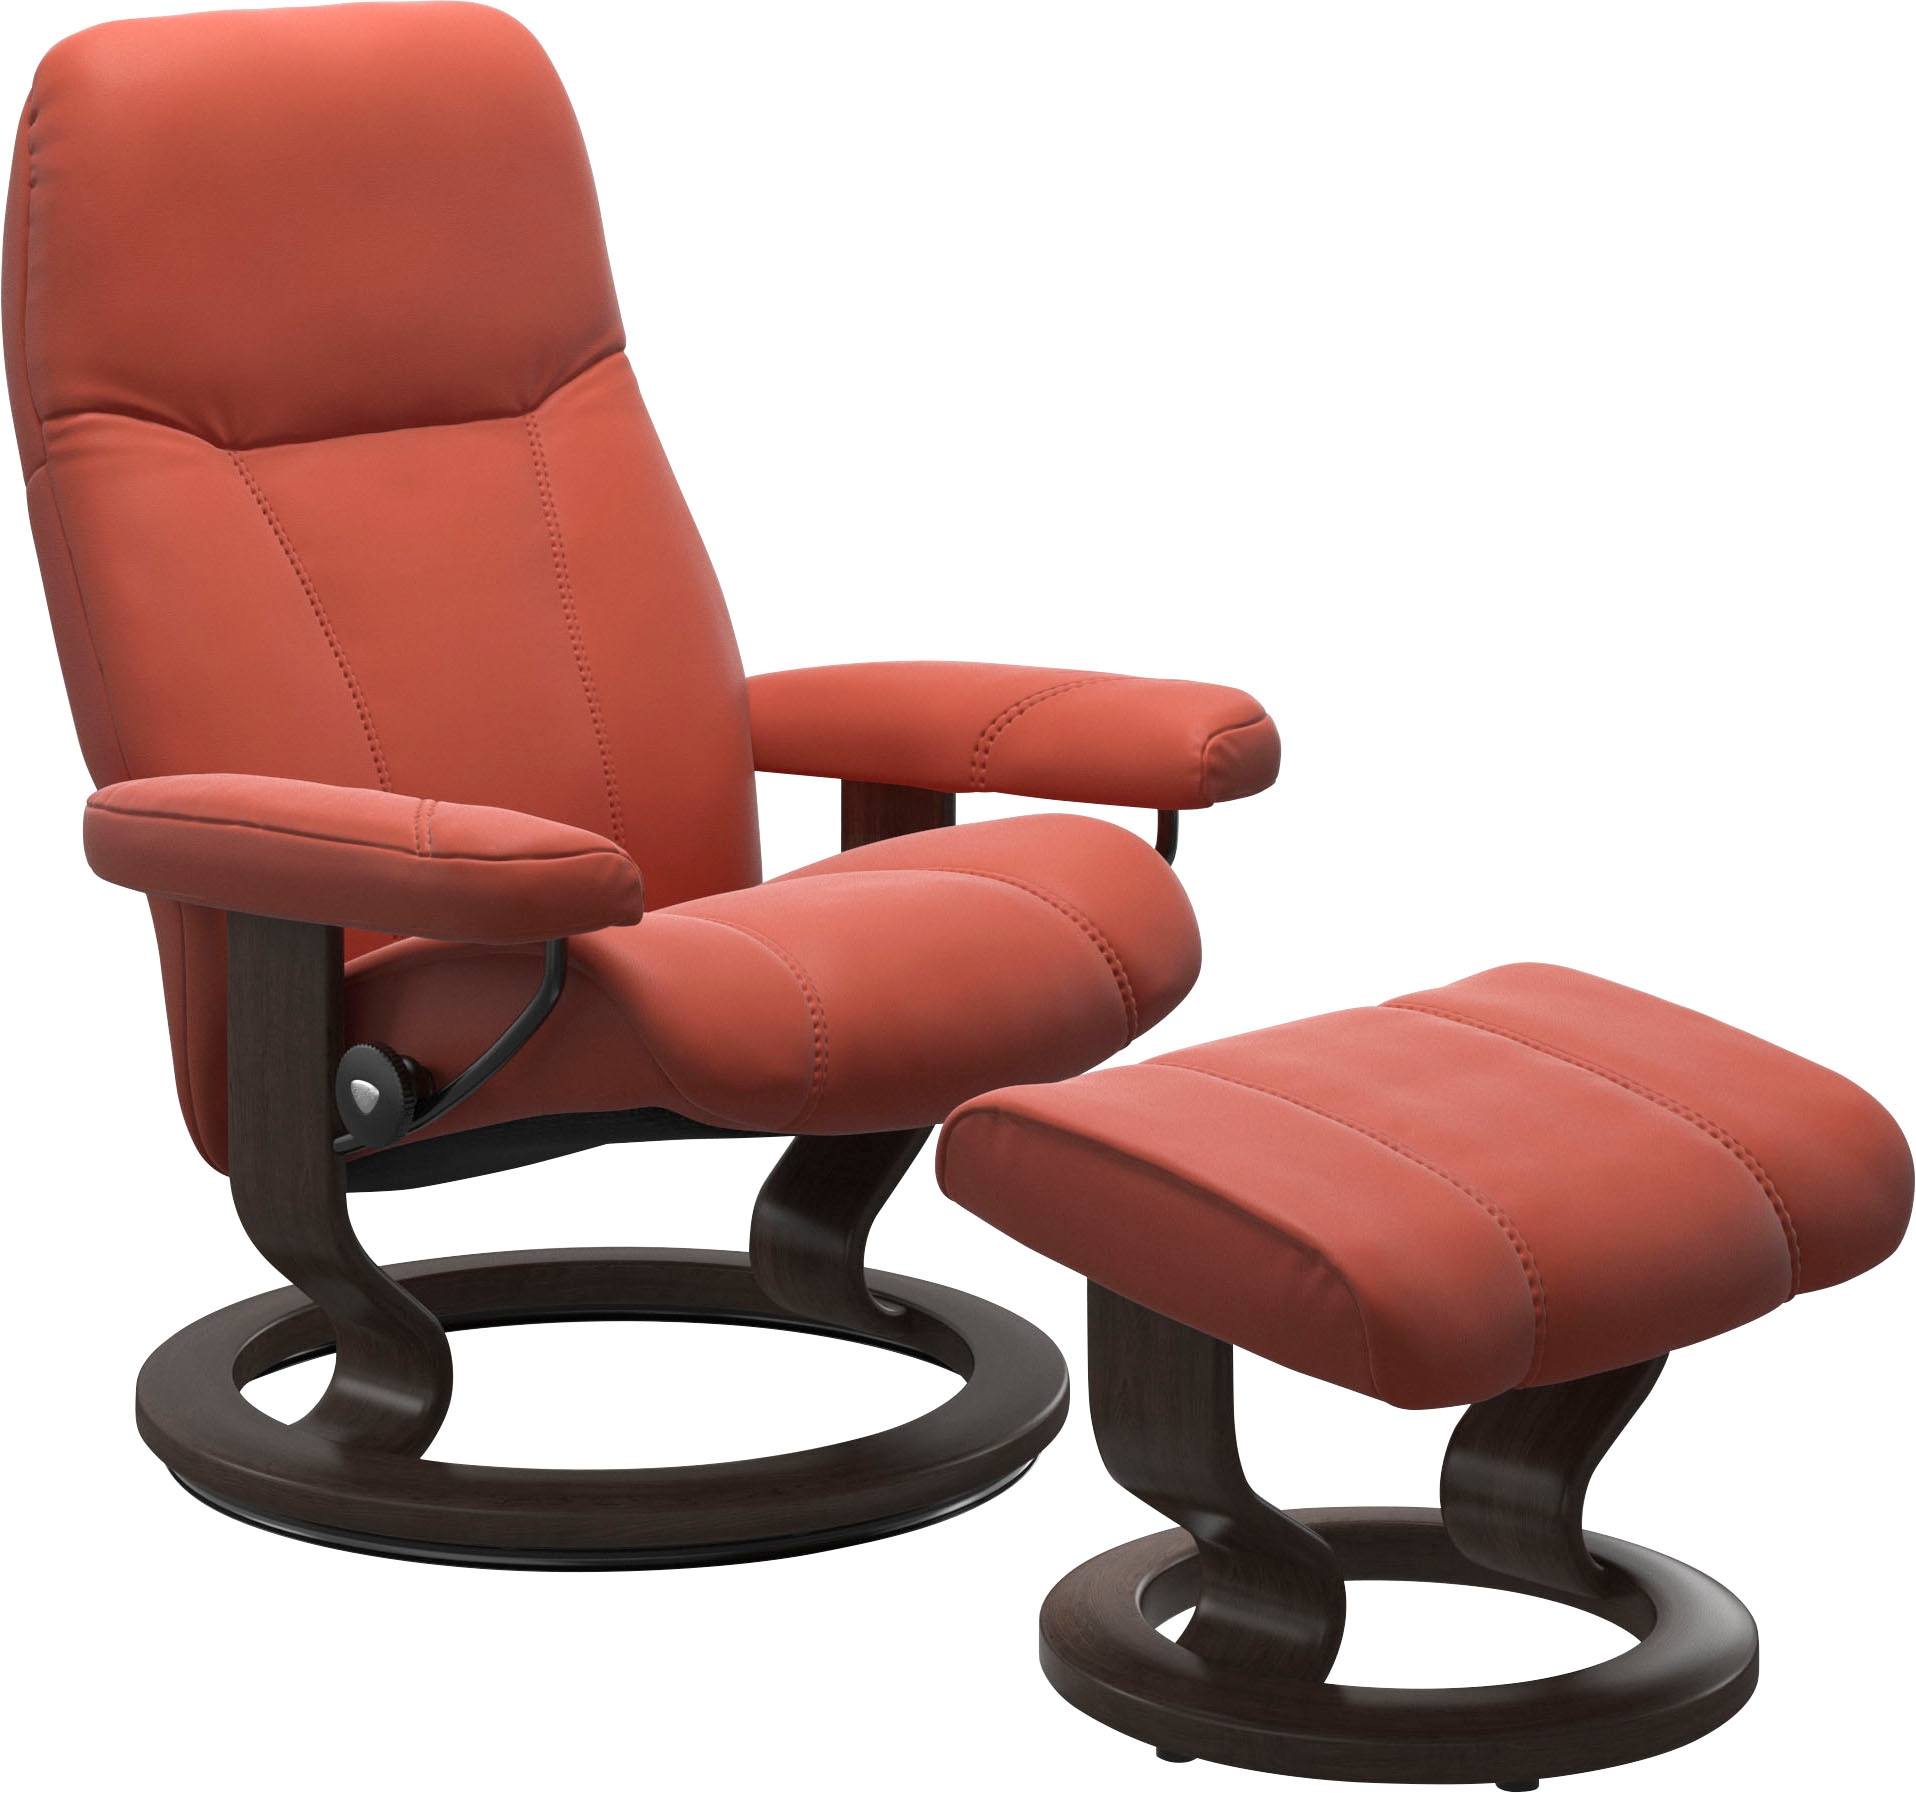 Stressless® Relaxsessel »Consul«, mit Classic Base, Größe S, Gestell Wenge